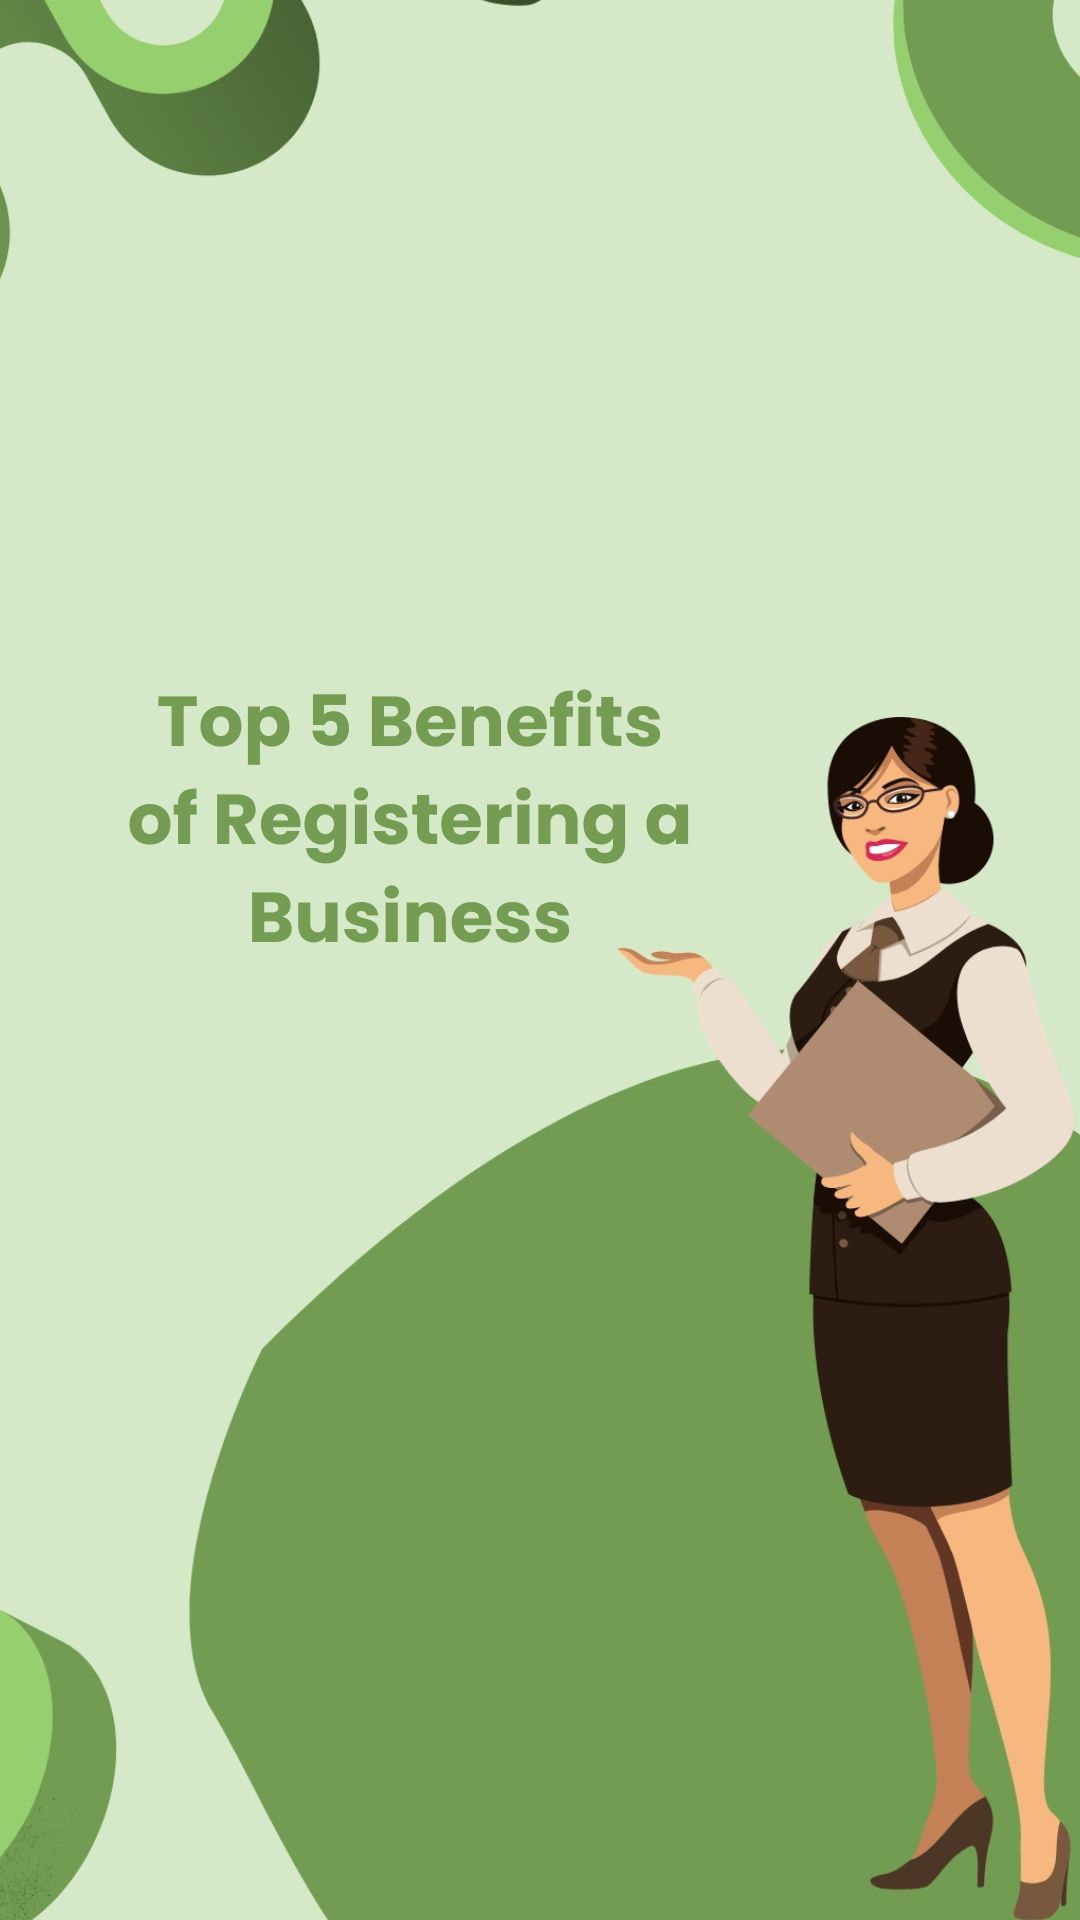 Top 5 Benefits of Registering a Business